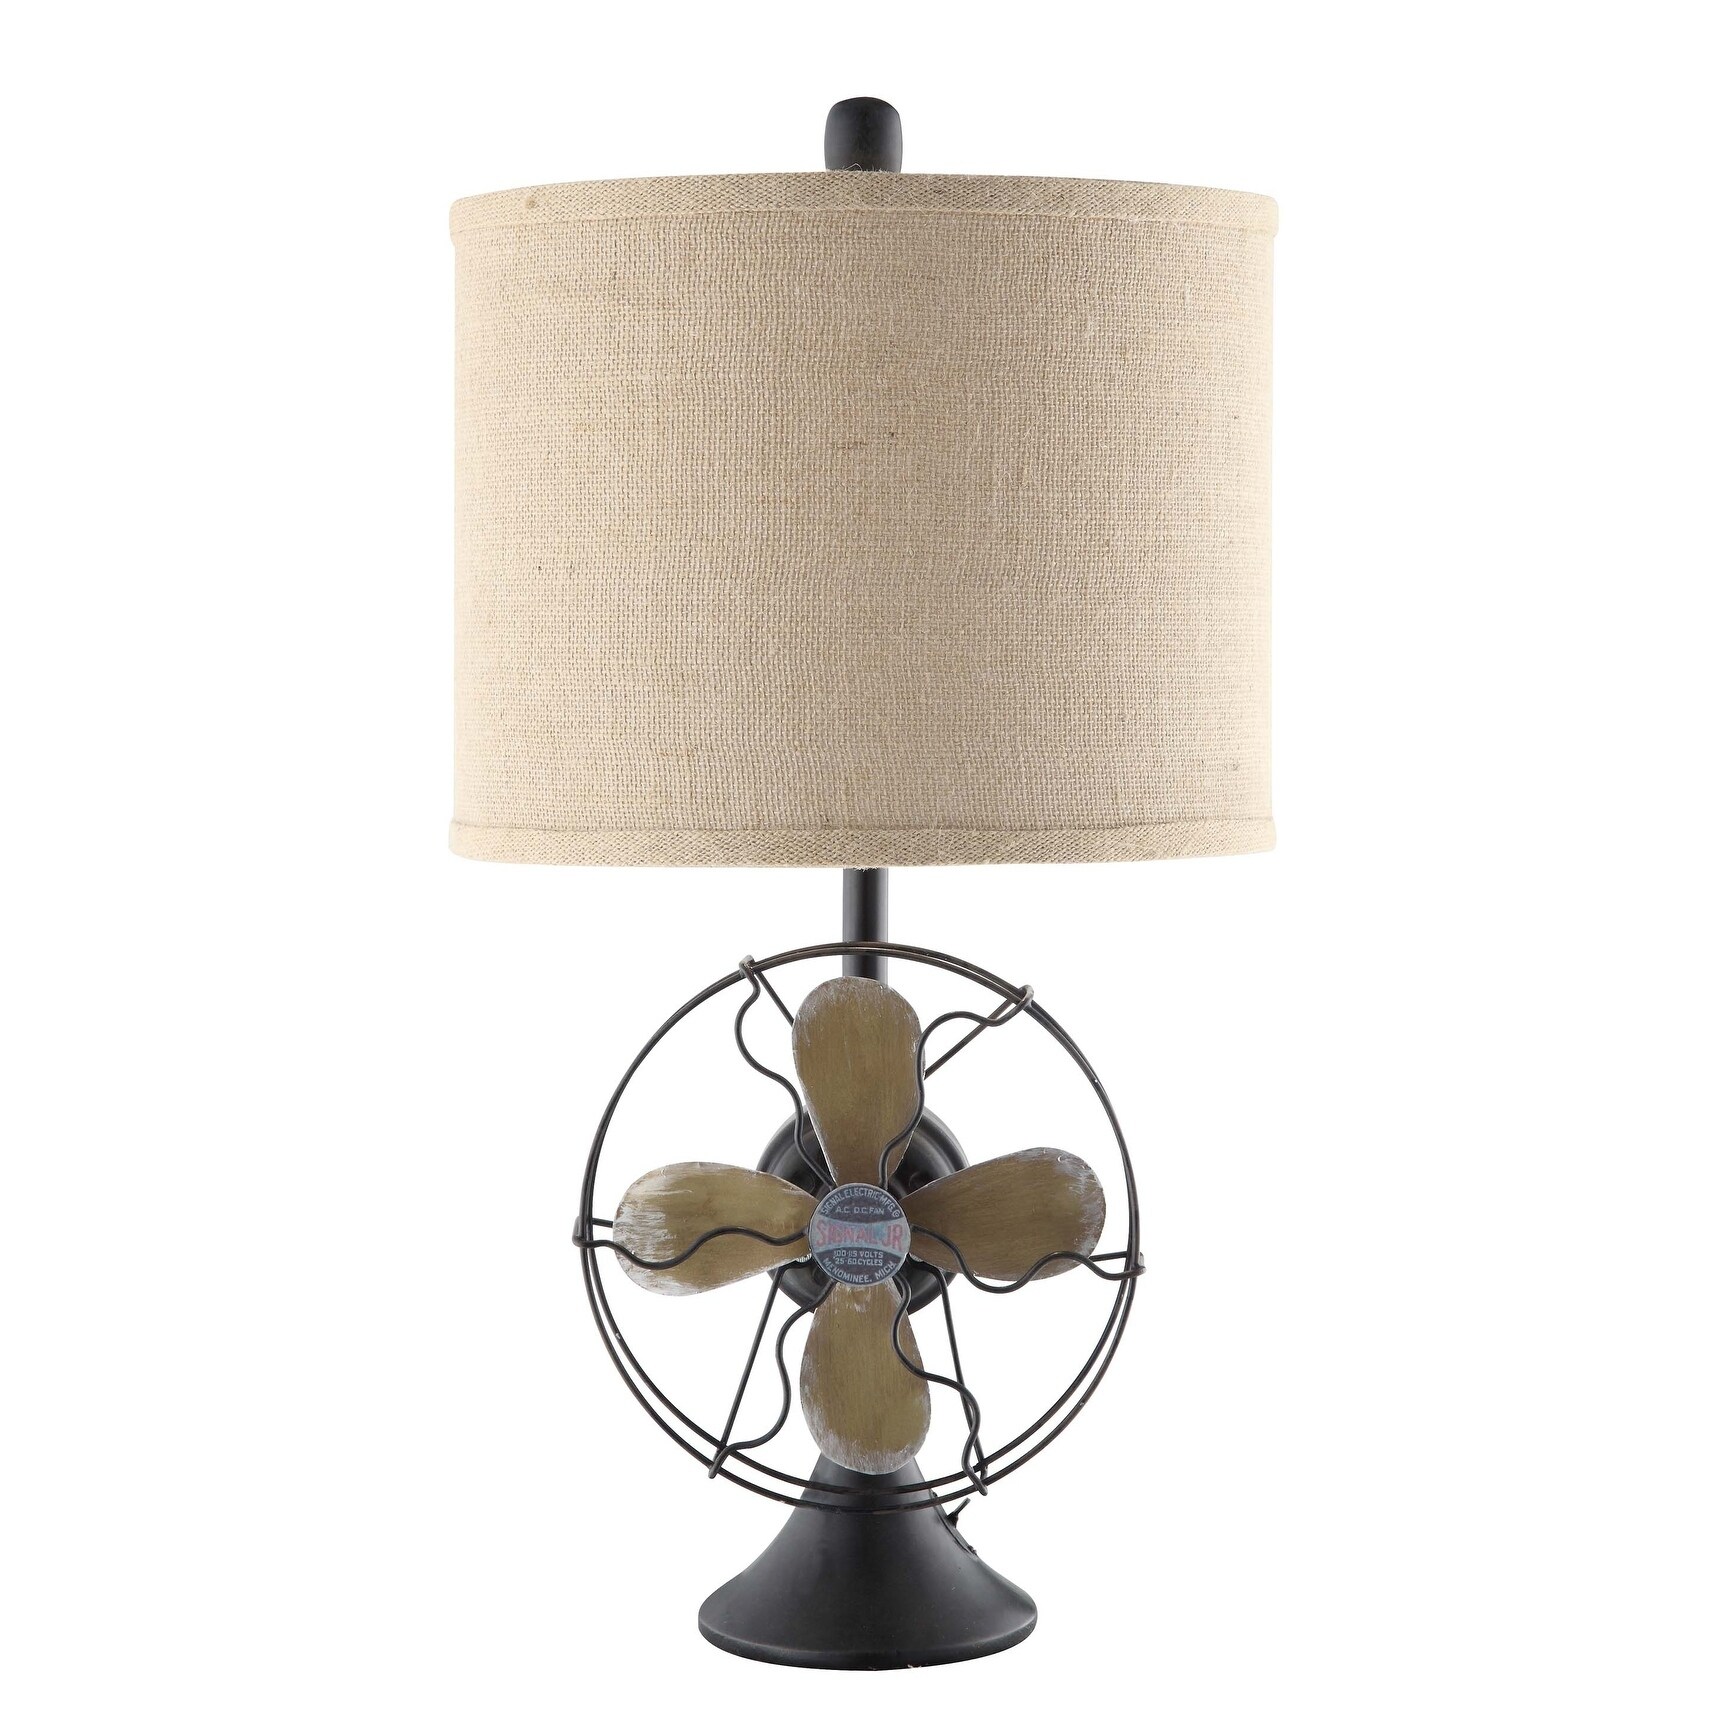 Shop Antique Fan 24 5 Inch Table Lamp Overstock